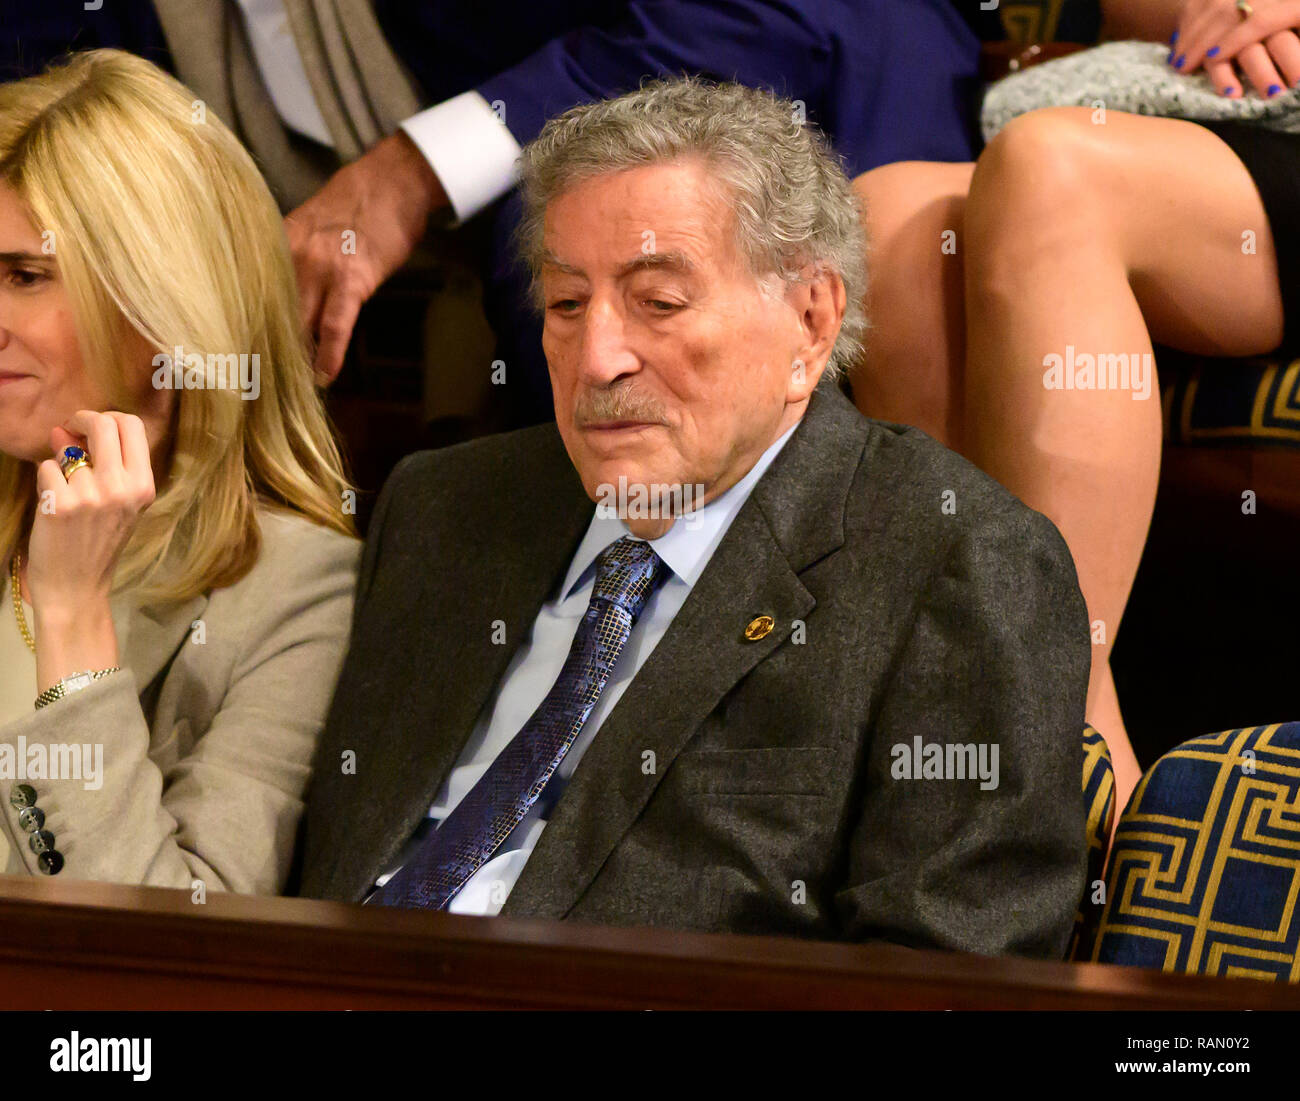 Washington, United States Of America. 03rd Jan, 2019. Singer Tony Bennett, a guest of Speaker of the United States House of Representatives Nancy Pelosi (Democrat of California), sits in the gallery as the 116th Congress convenes for its opening session in the US House Chamber of the US Capitol in Washington, DC on Thursday, January 3, 2019. Credit: Ron Sachs/CNP (RESTRICTION: NO New York or New Jersey Newspapers or newspapers within a 75 mile radius of New York City) | usage worldwide Credit: dpa/Alamy Live News Stock Photo